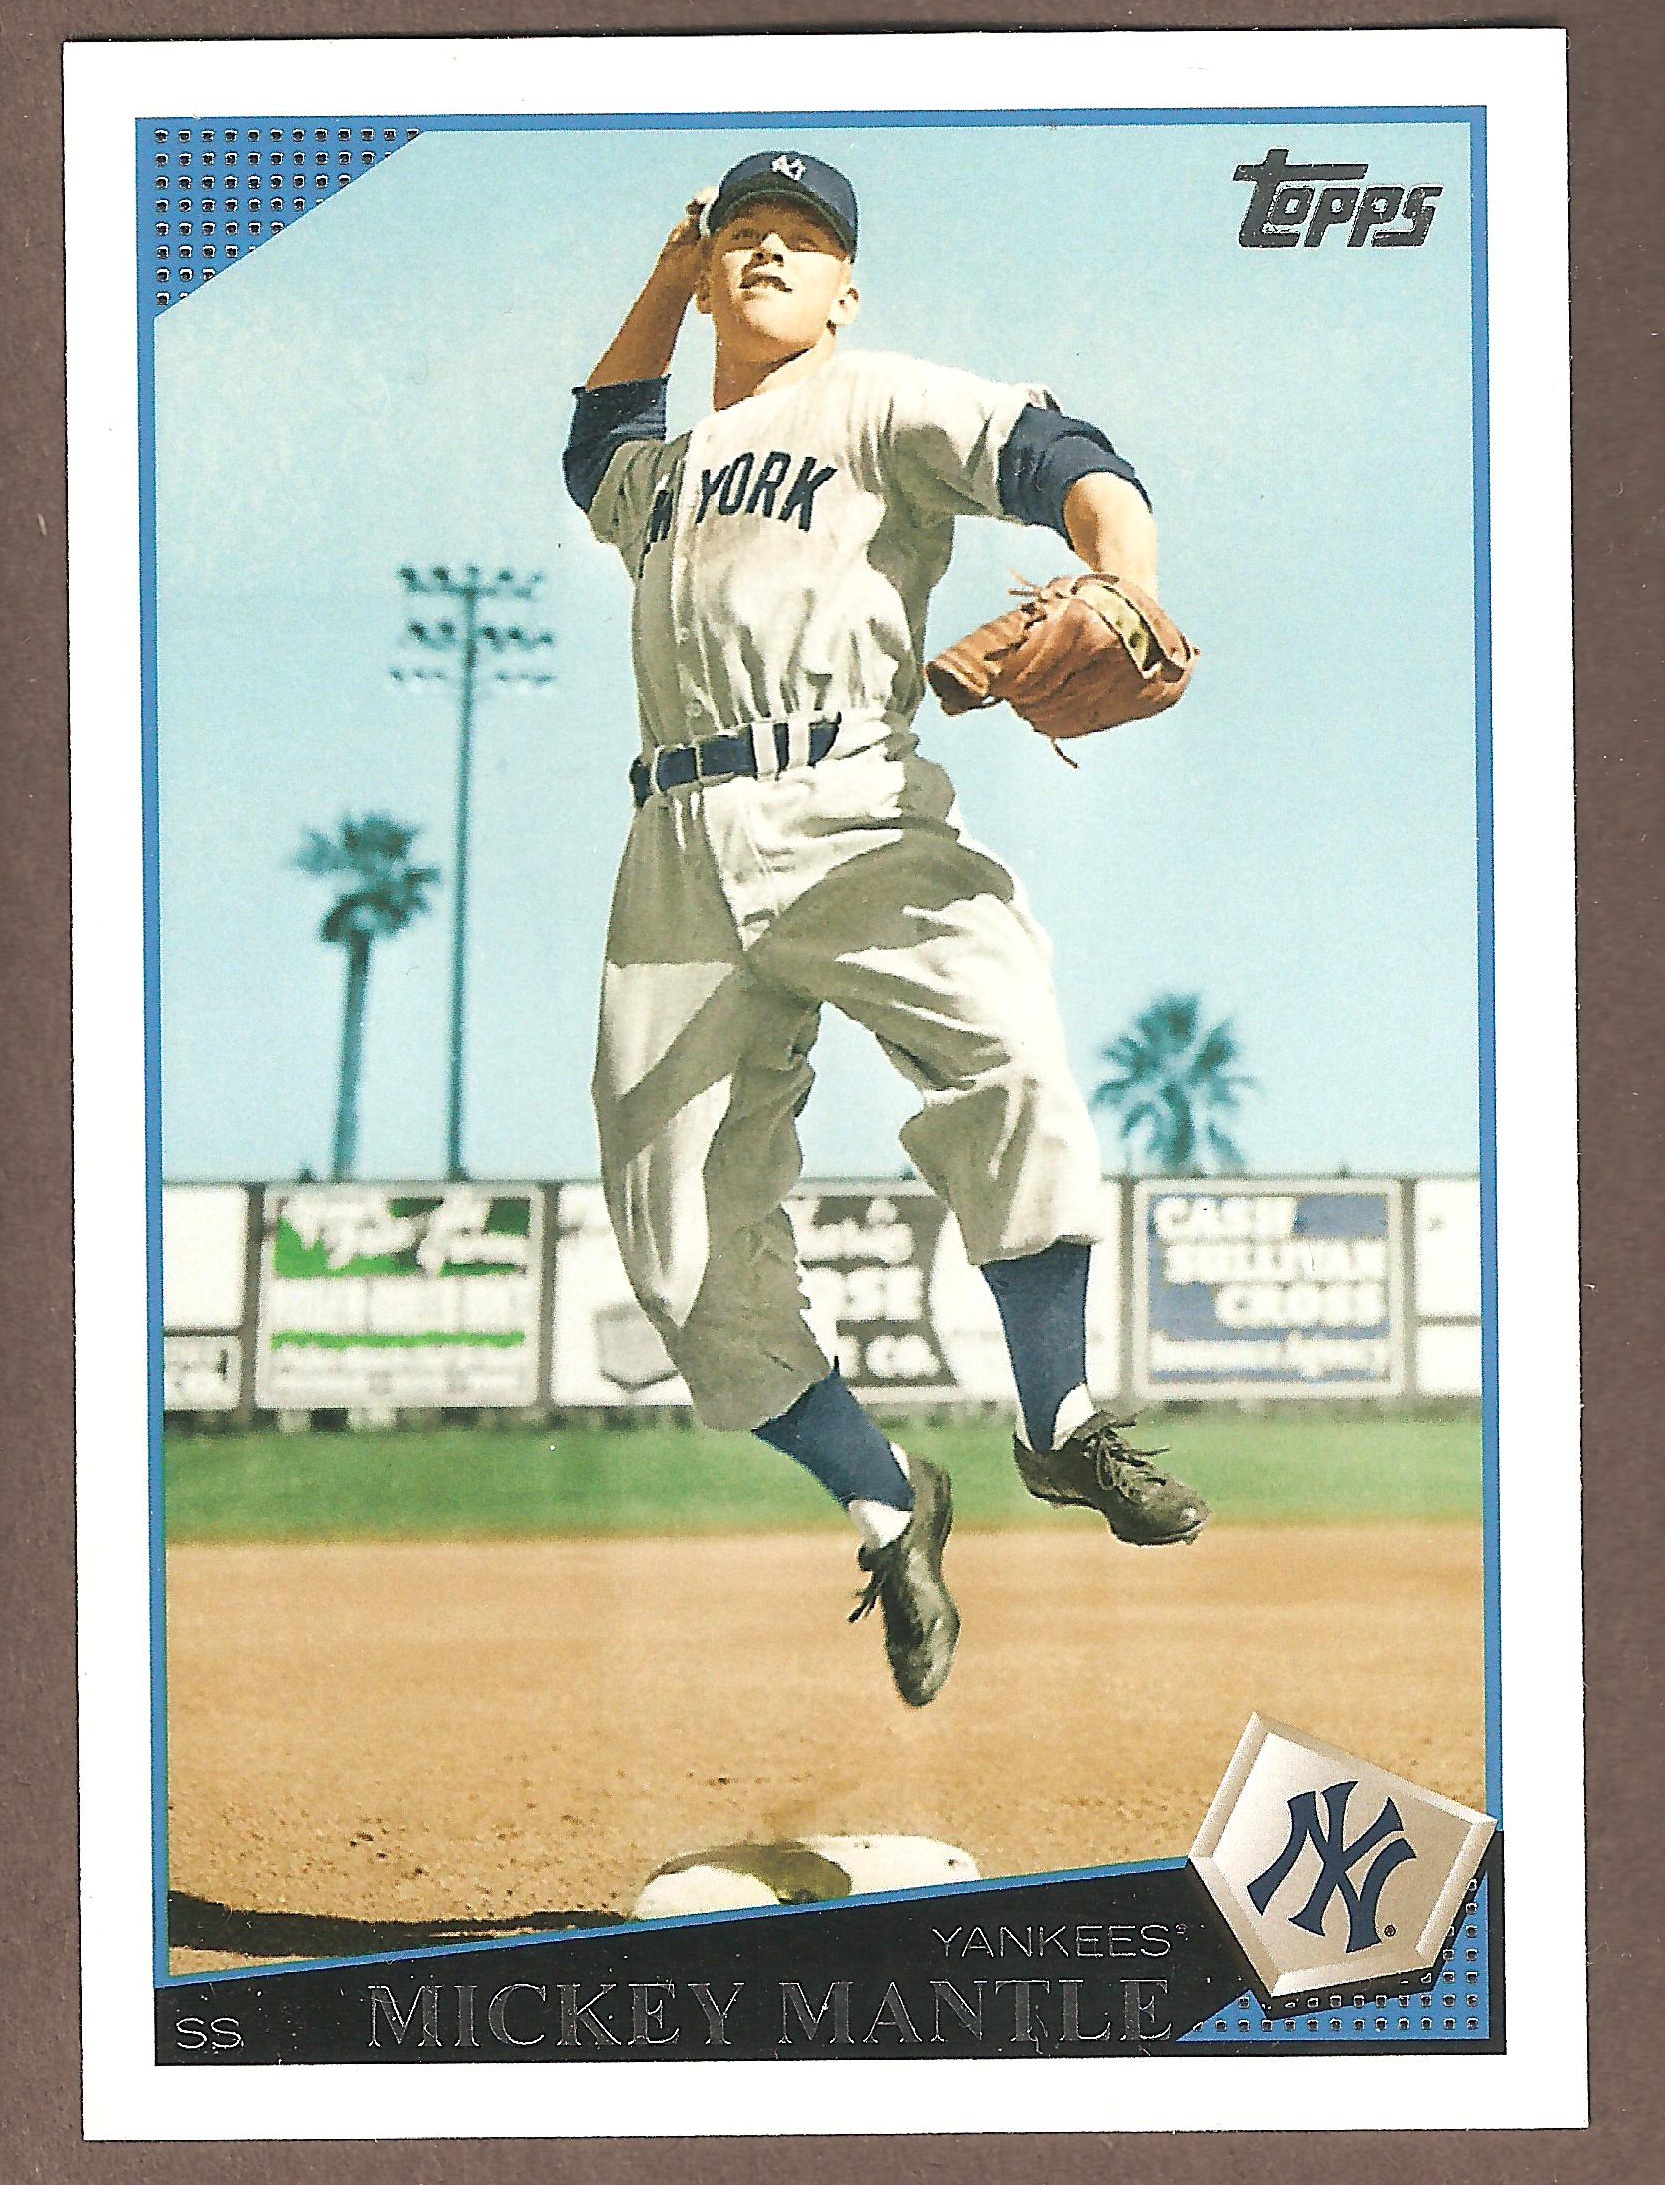 2009 Topps Mickey Mantle